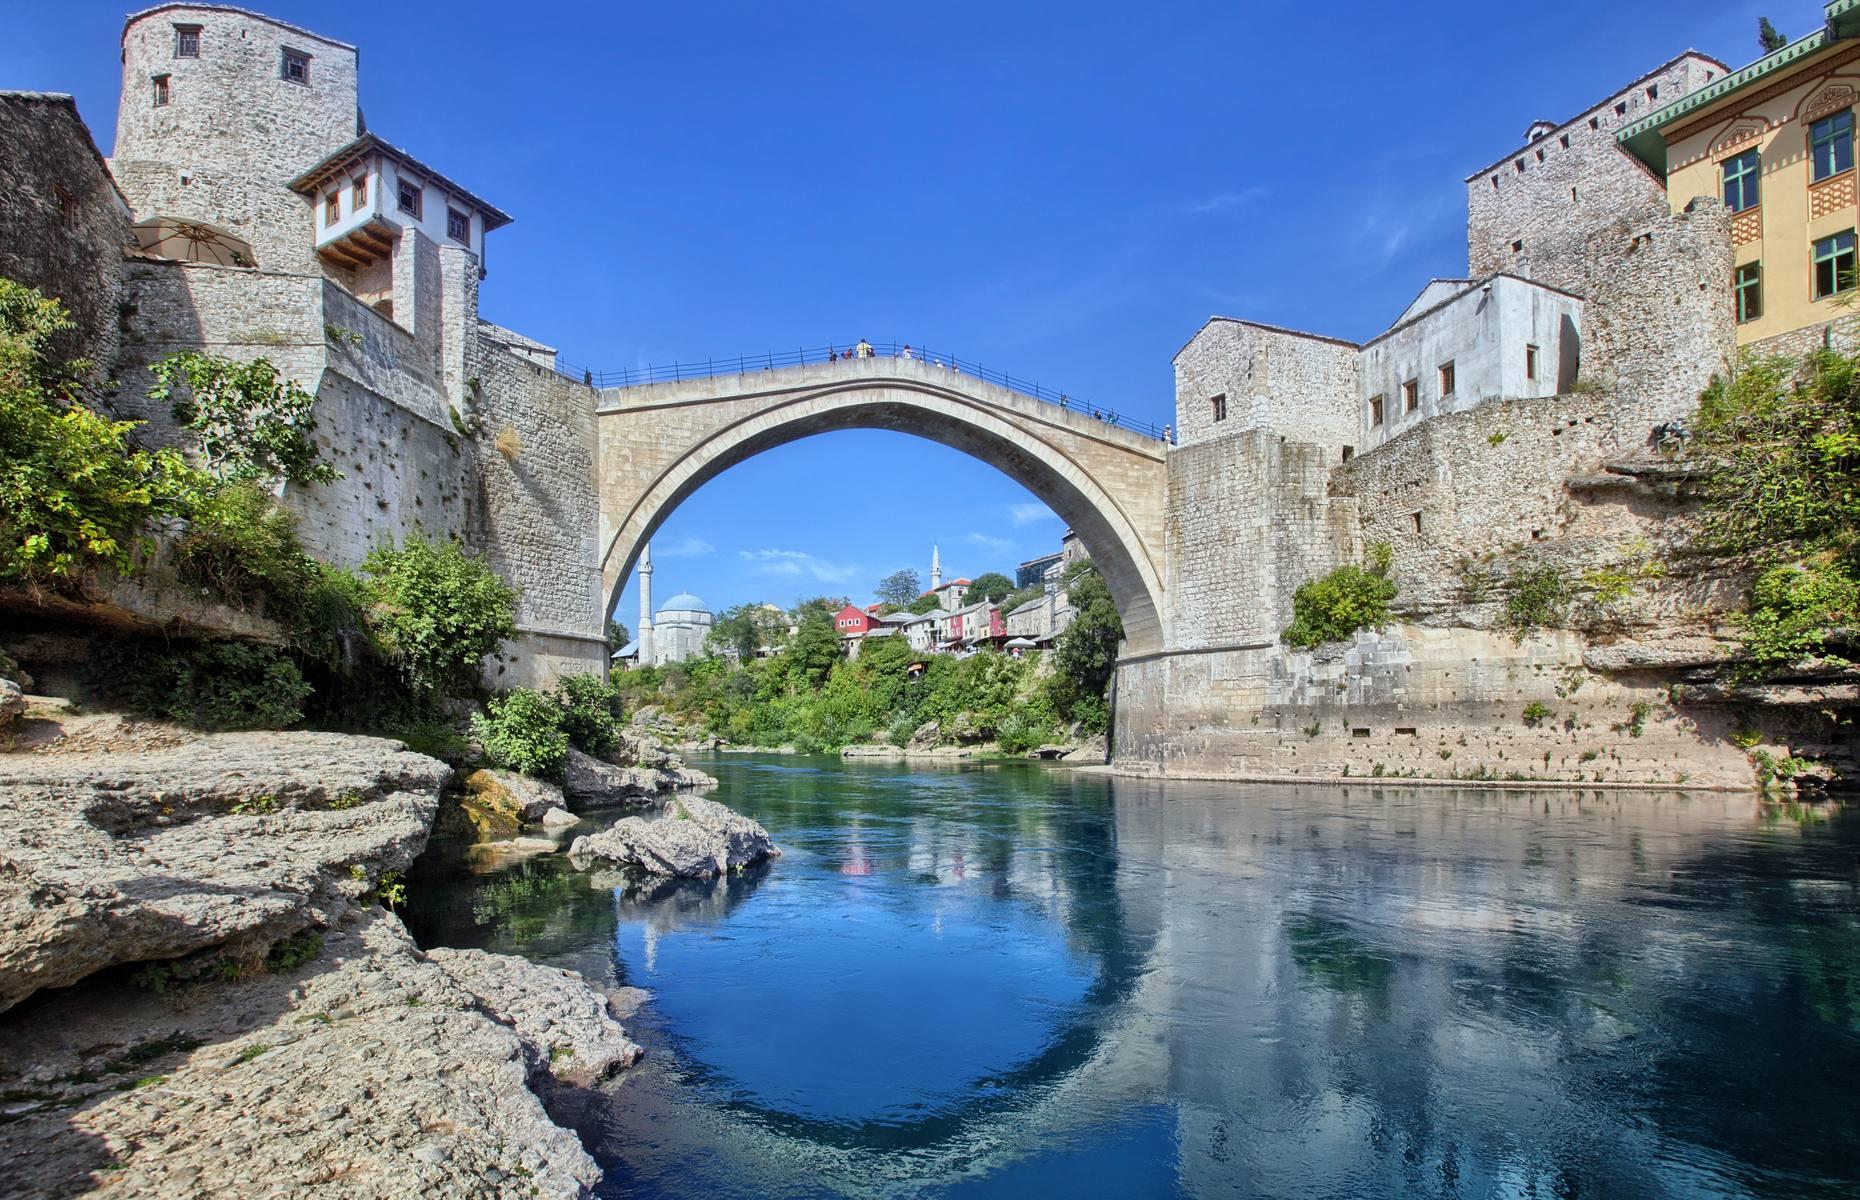 The word Most means bridge in Slavic languages and this town is named after its most famous feature, a bridge that spans the river Neretva. Mostar began as a trading town between the Adriatic coast and central Bosnia in medieval times – the pedestrian bridge was then made of wood, but was rebuilt in stone in 1468 when the town came under the rule of the Ottoman Empire. Tragically, the 400-year-old bridge was destroyed during the Bosnian war in the 1990s, but has since been reconstructed.